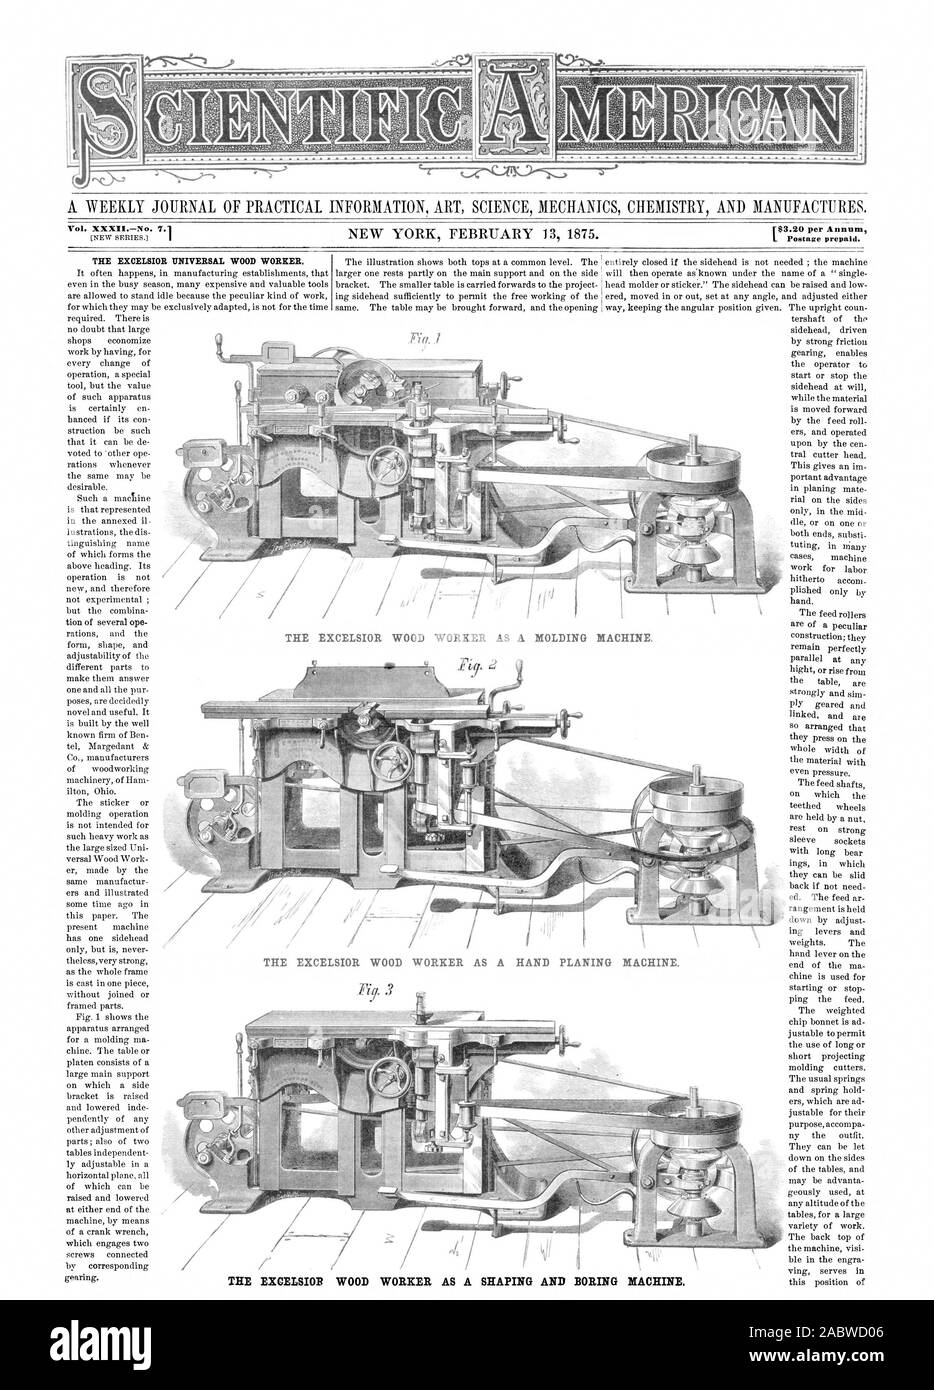 THE EXCELSIOR UNIVERSAL WOOD WORKER. THE EXCELSIOR WOOD WORKER AS A SHAPING AND BORING MACHINE, scientific american, 1875-02-13 Stock Photo